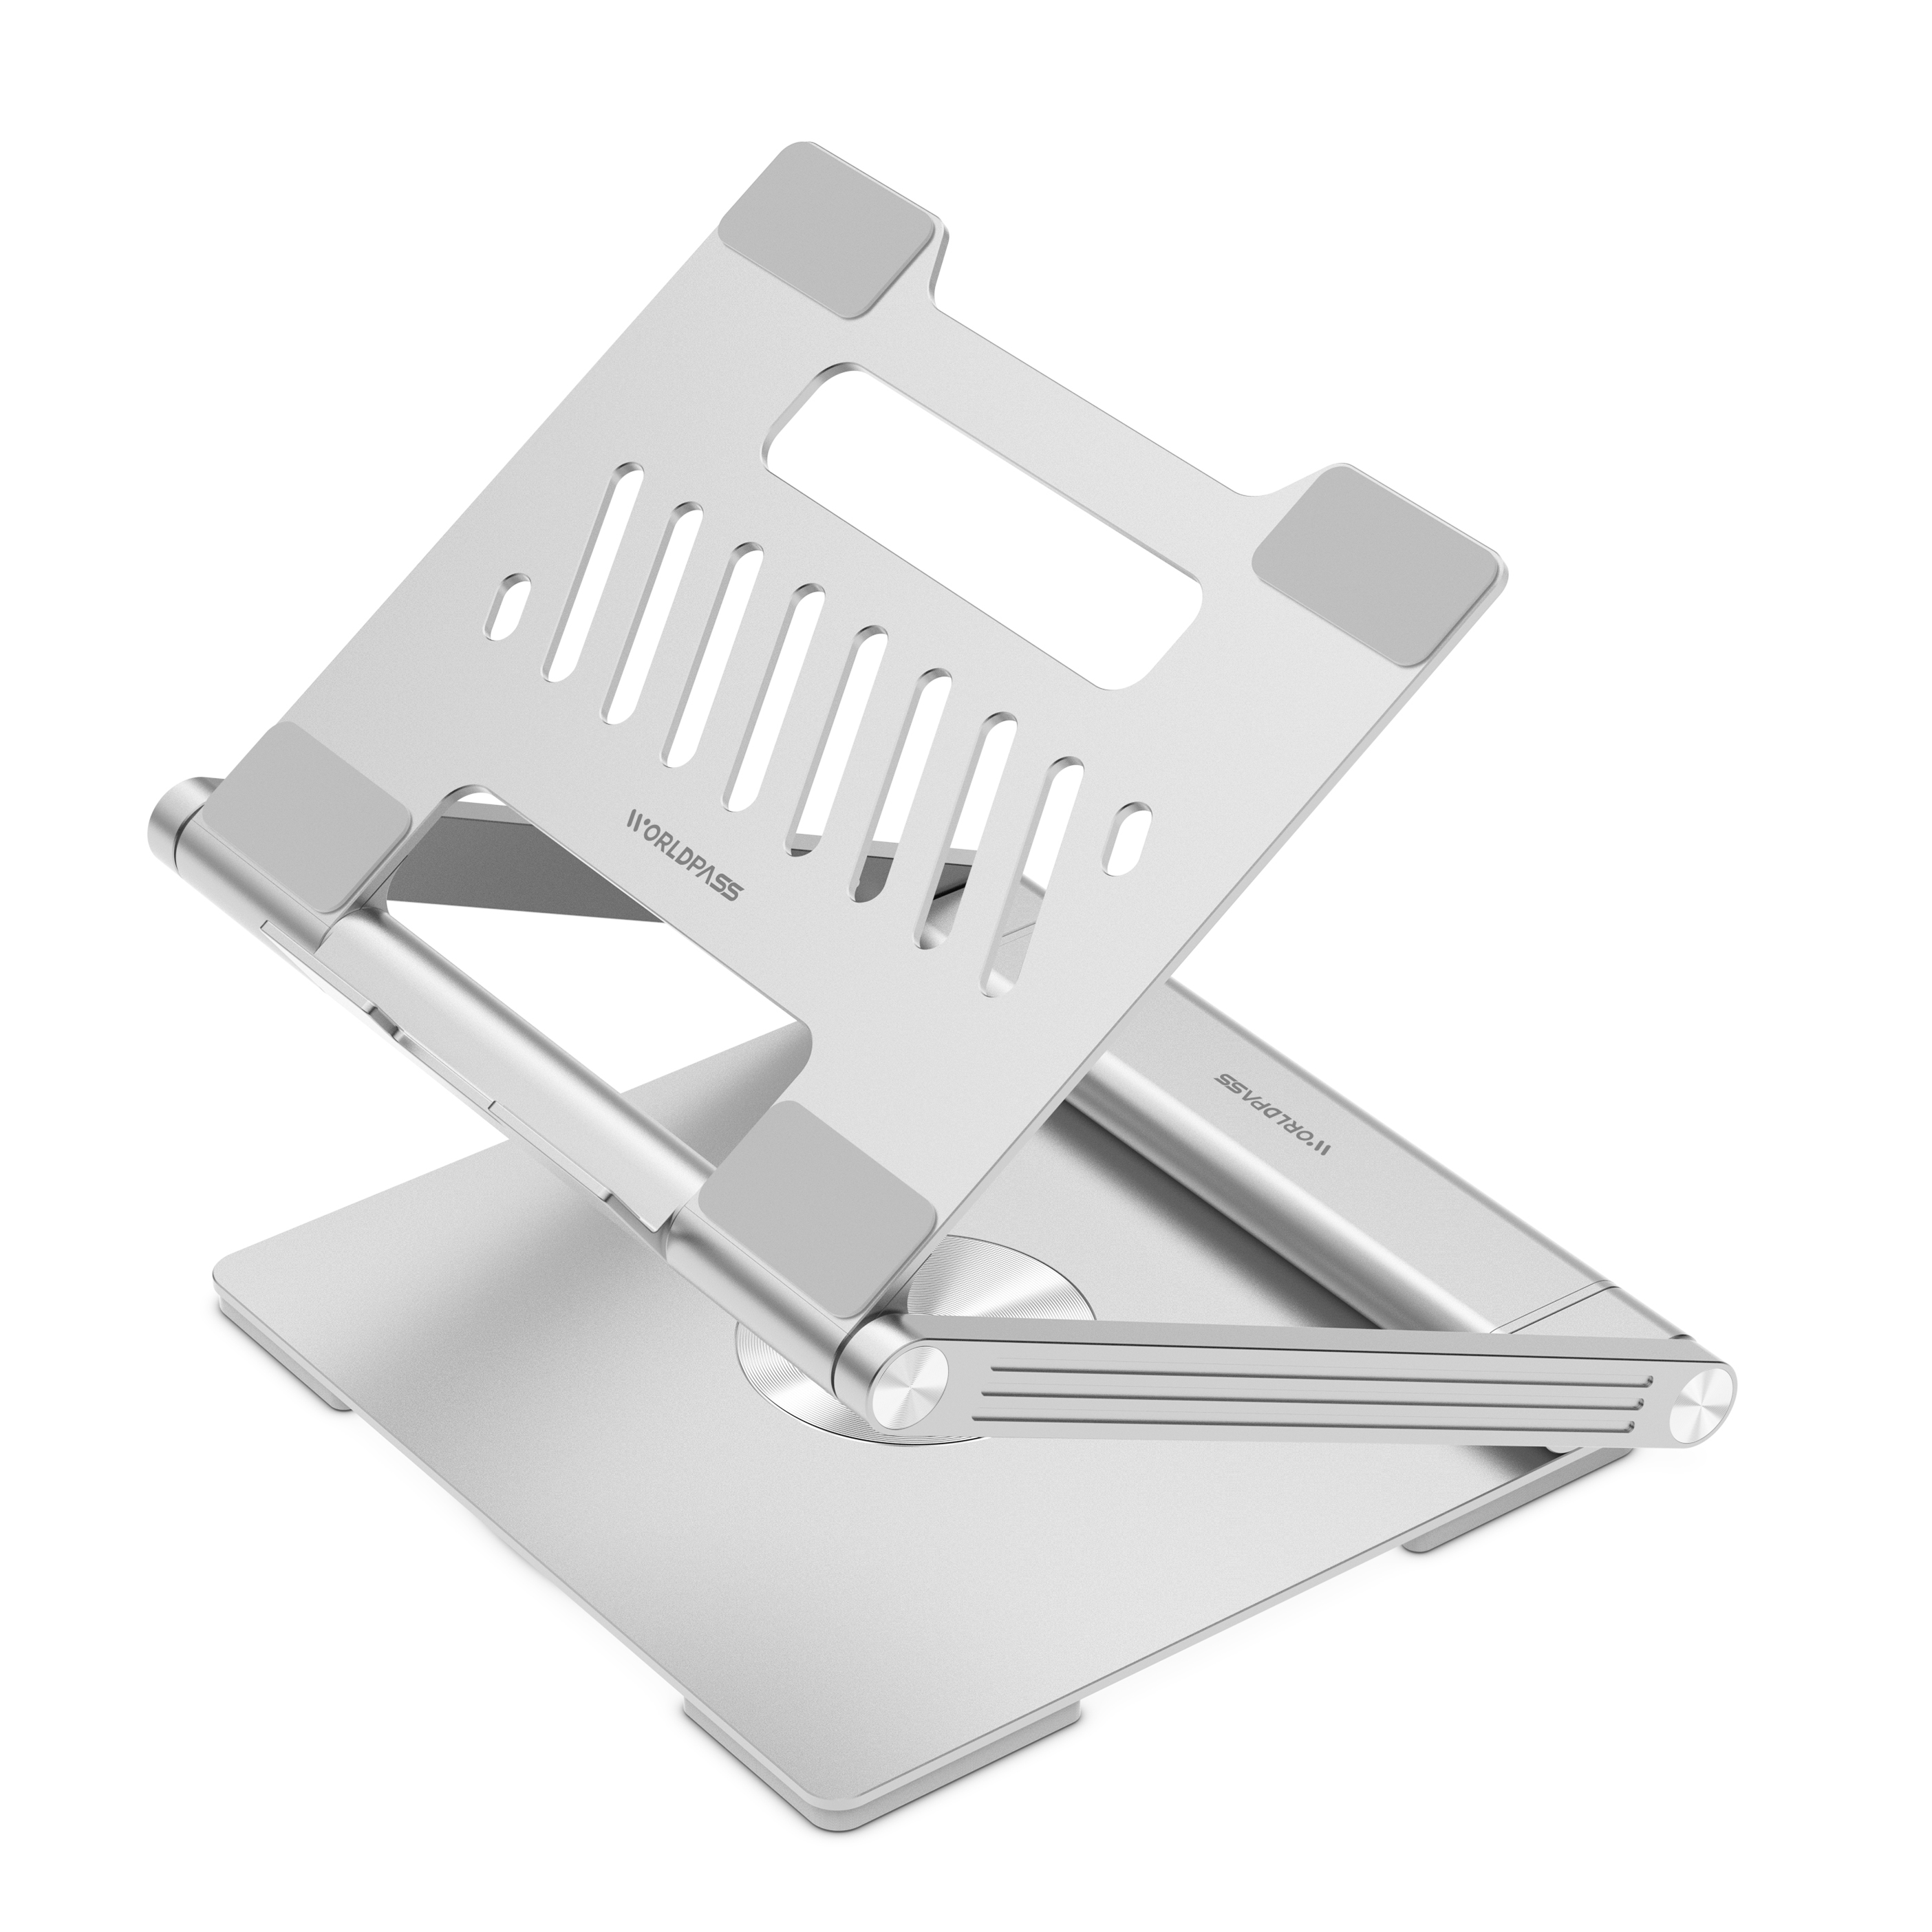 360-degree folding all aluminum alloy dock cooling laptop stand – customizable